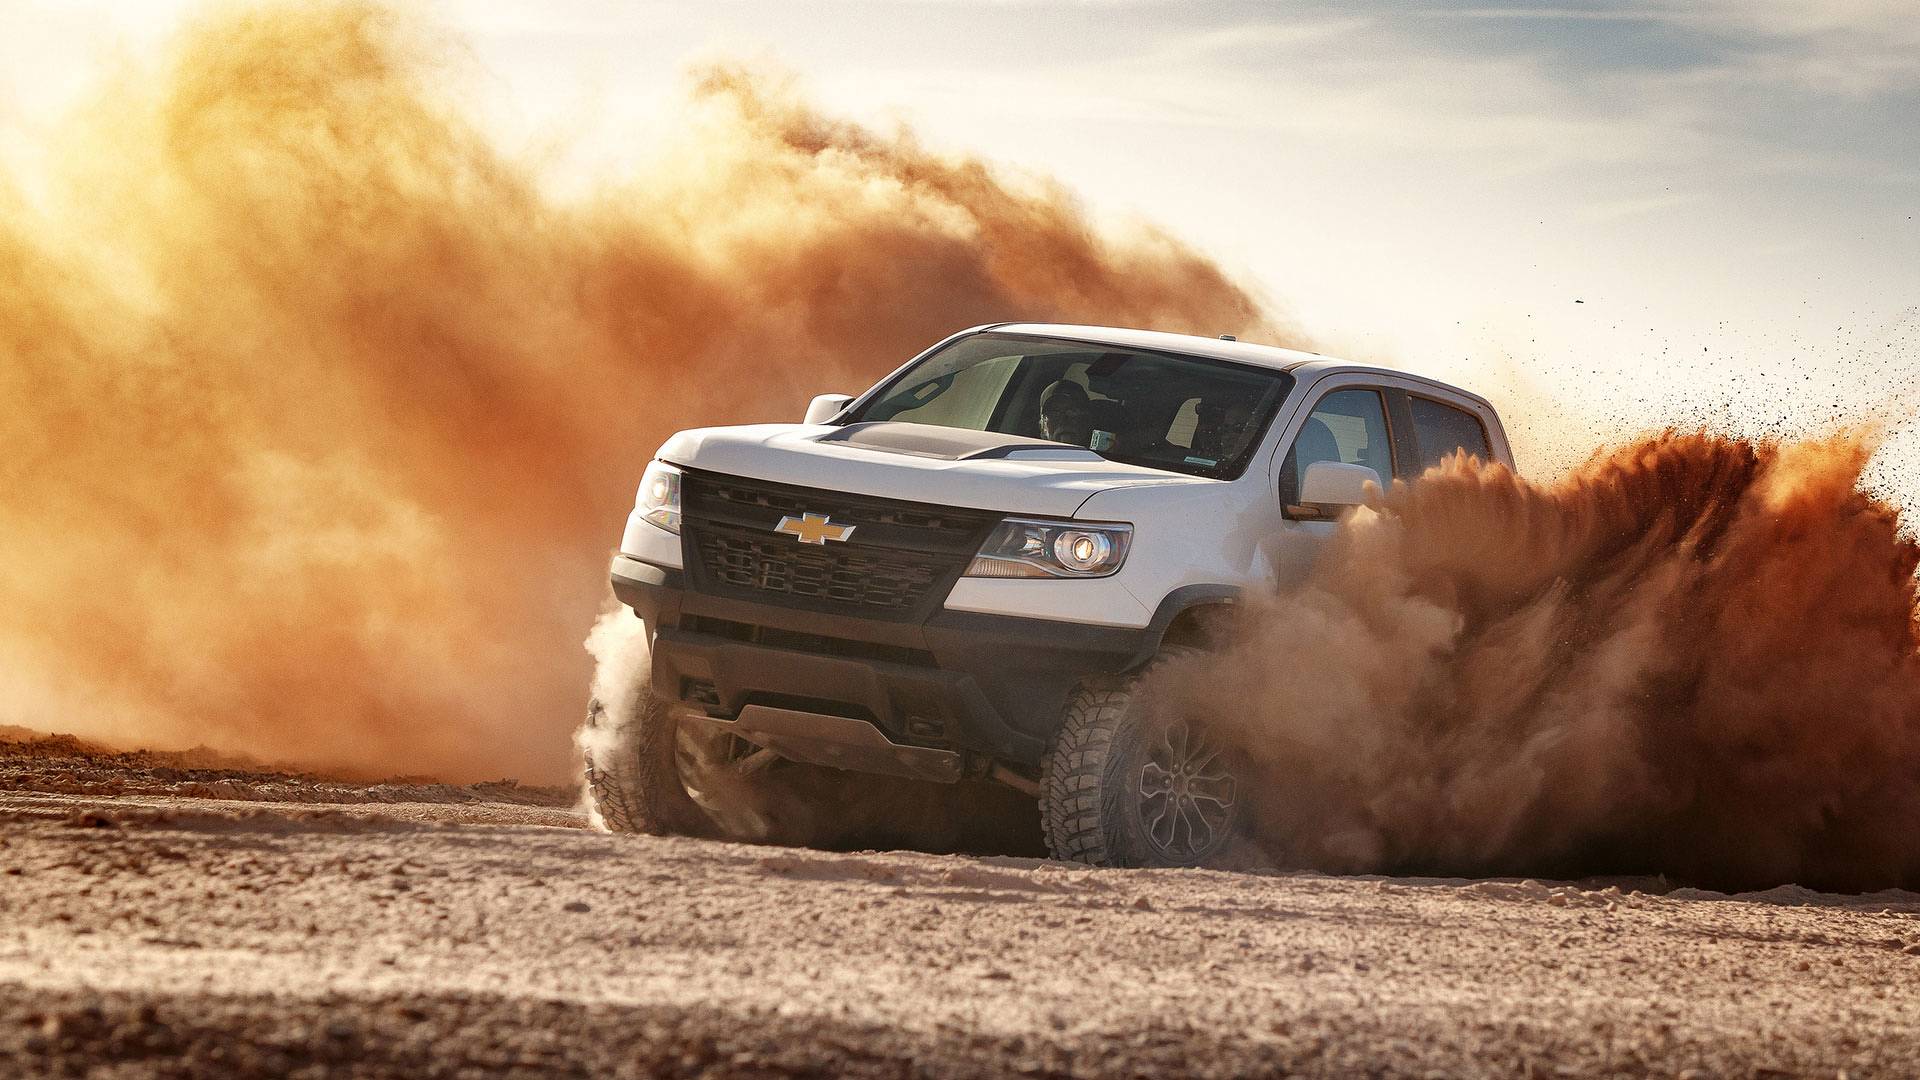 Chevrolet Colorado ZR2 Race Development Truck builds on the ZR2’s desert-running capability. Tuned for high-speed off-road use equipped with unique parts validated by Chevy Performance Engineering.